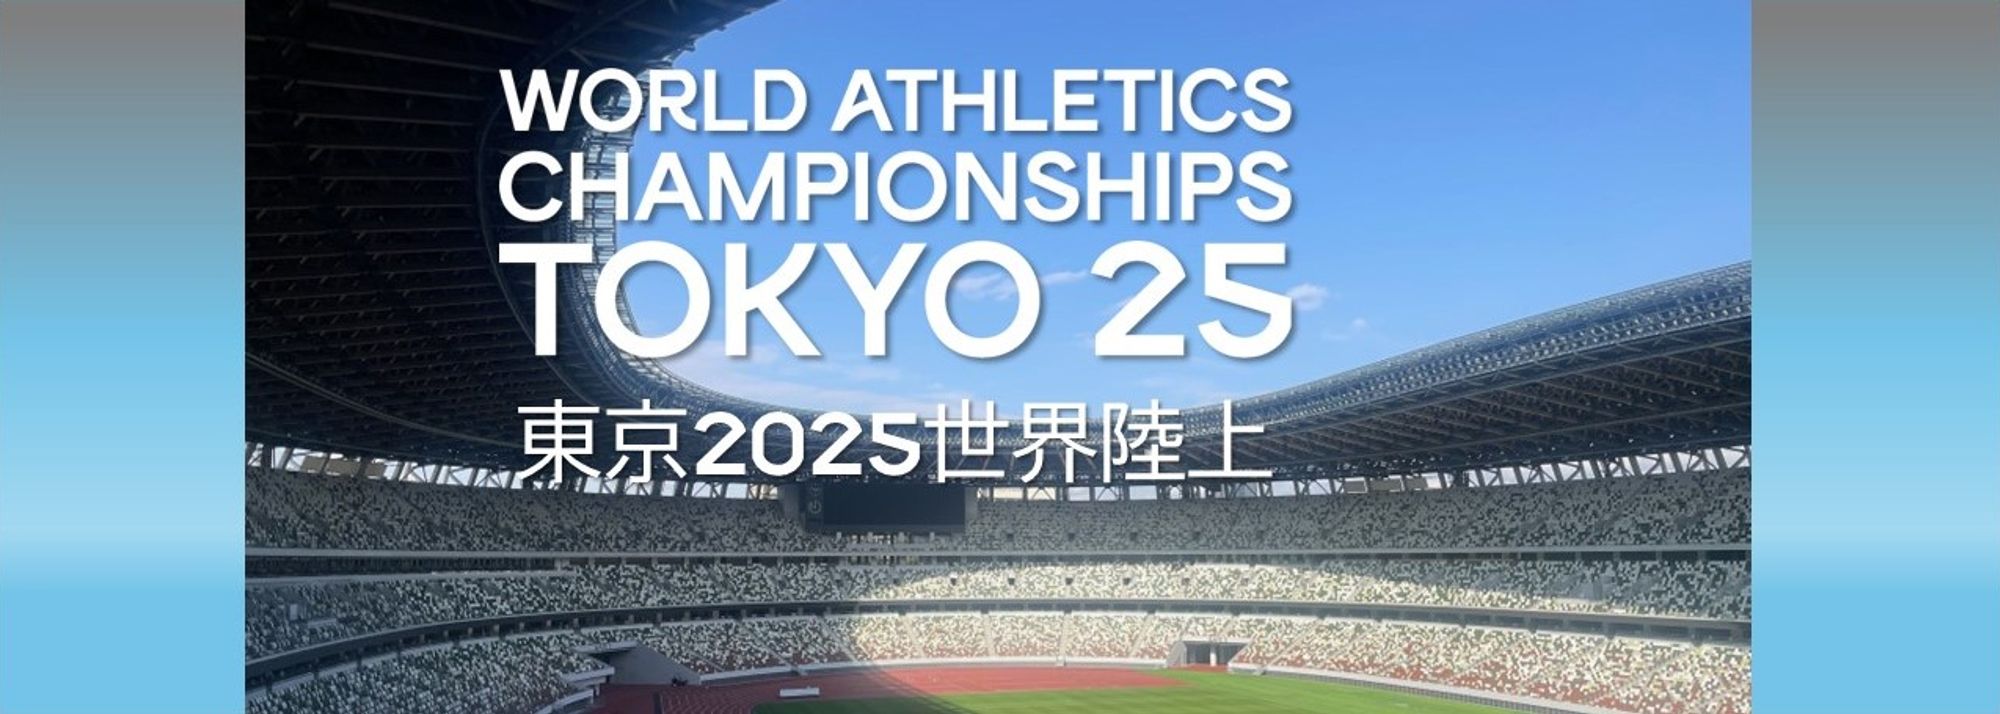 The Local Organising Committee of World Athletics Championships Tokyo 25 is pleased to announce that 